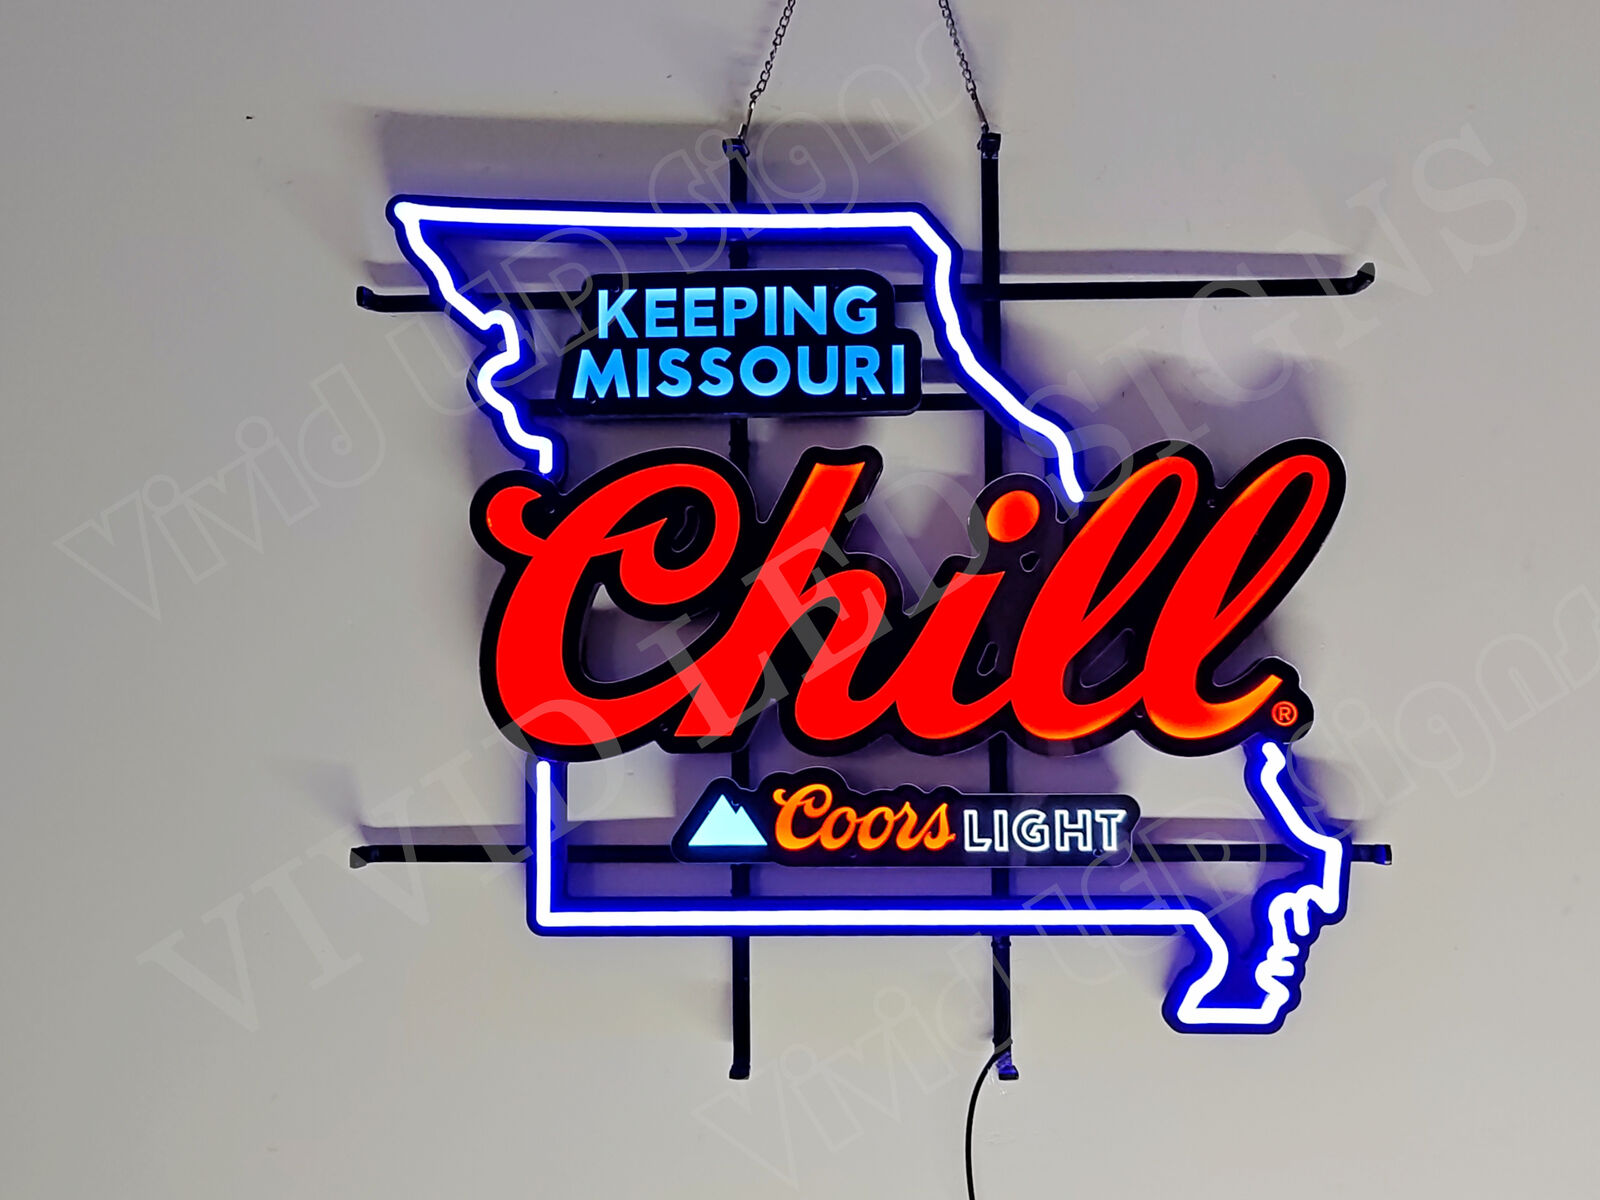 Beer Mountain Keeping Missouri Chill Vivid LED Neon Sign Light Lamp With Dimmer